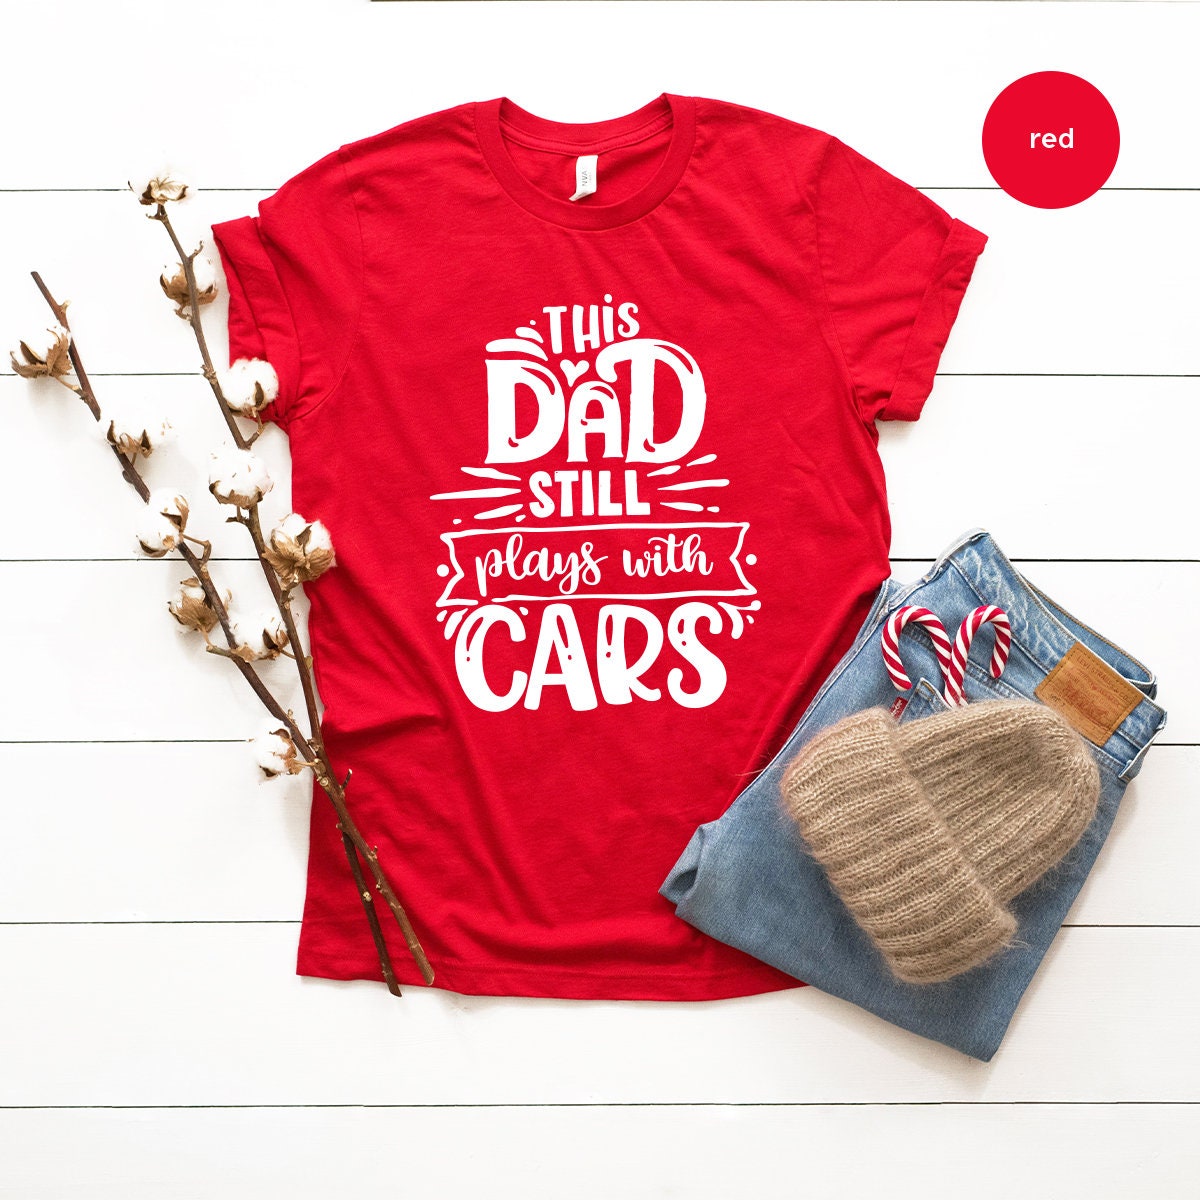 Funny Dad Shirt, Dad Shirts, This Dad Still Plays With Cars Shirt, Daddy T Shirt, Best Dad Evet Shirt, Car Lover Dad Gift, Fatherhood Shirt - Fastdeliverytees.com